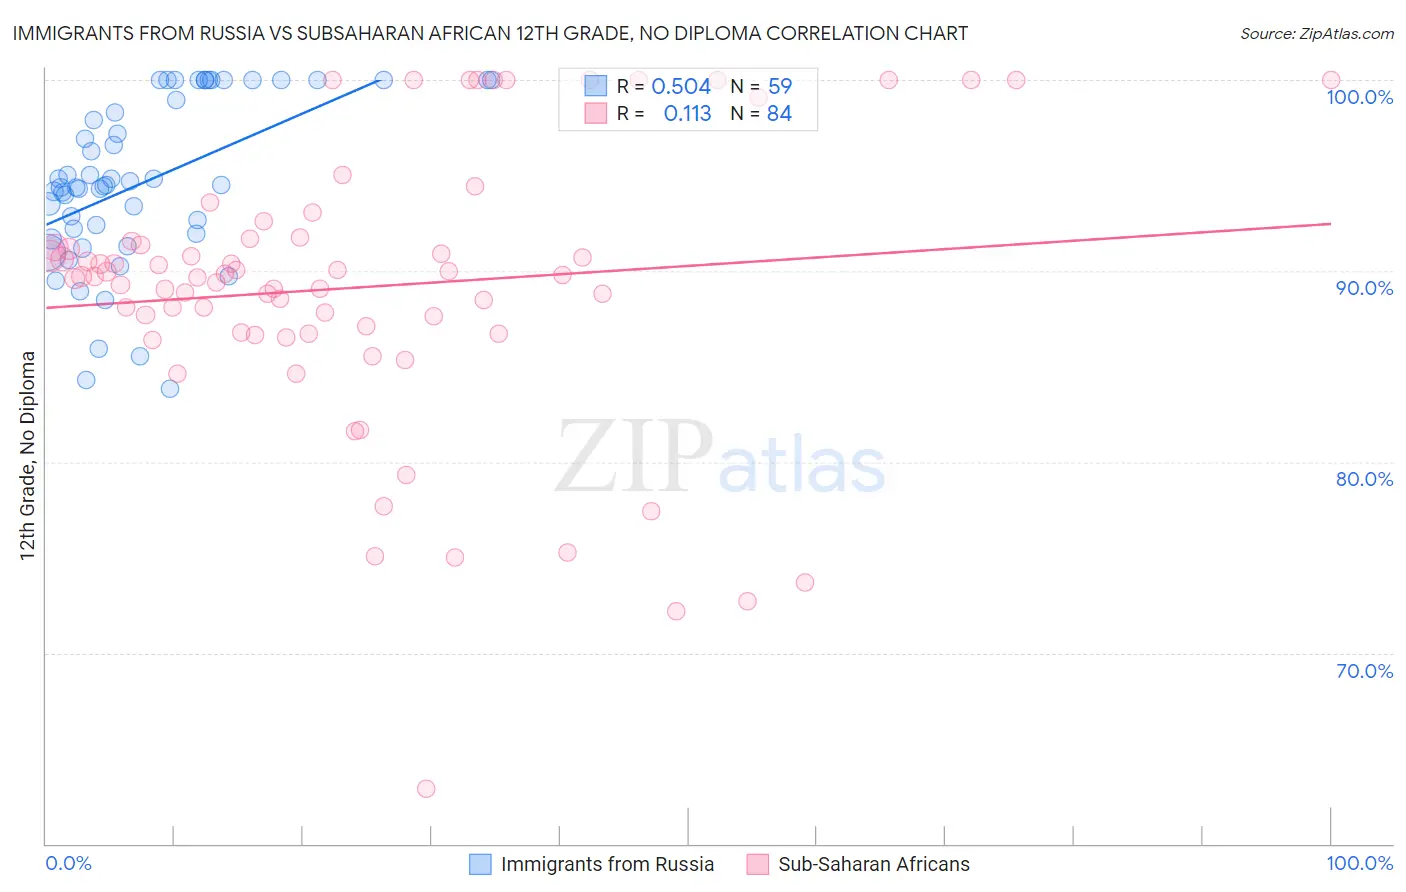 Immigrants from Russia vs Subsaharan African 12th Grade, No Diploma